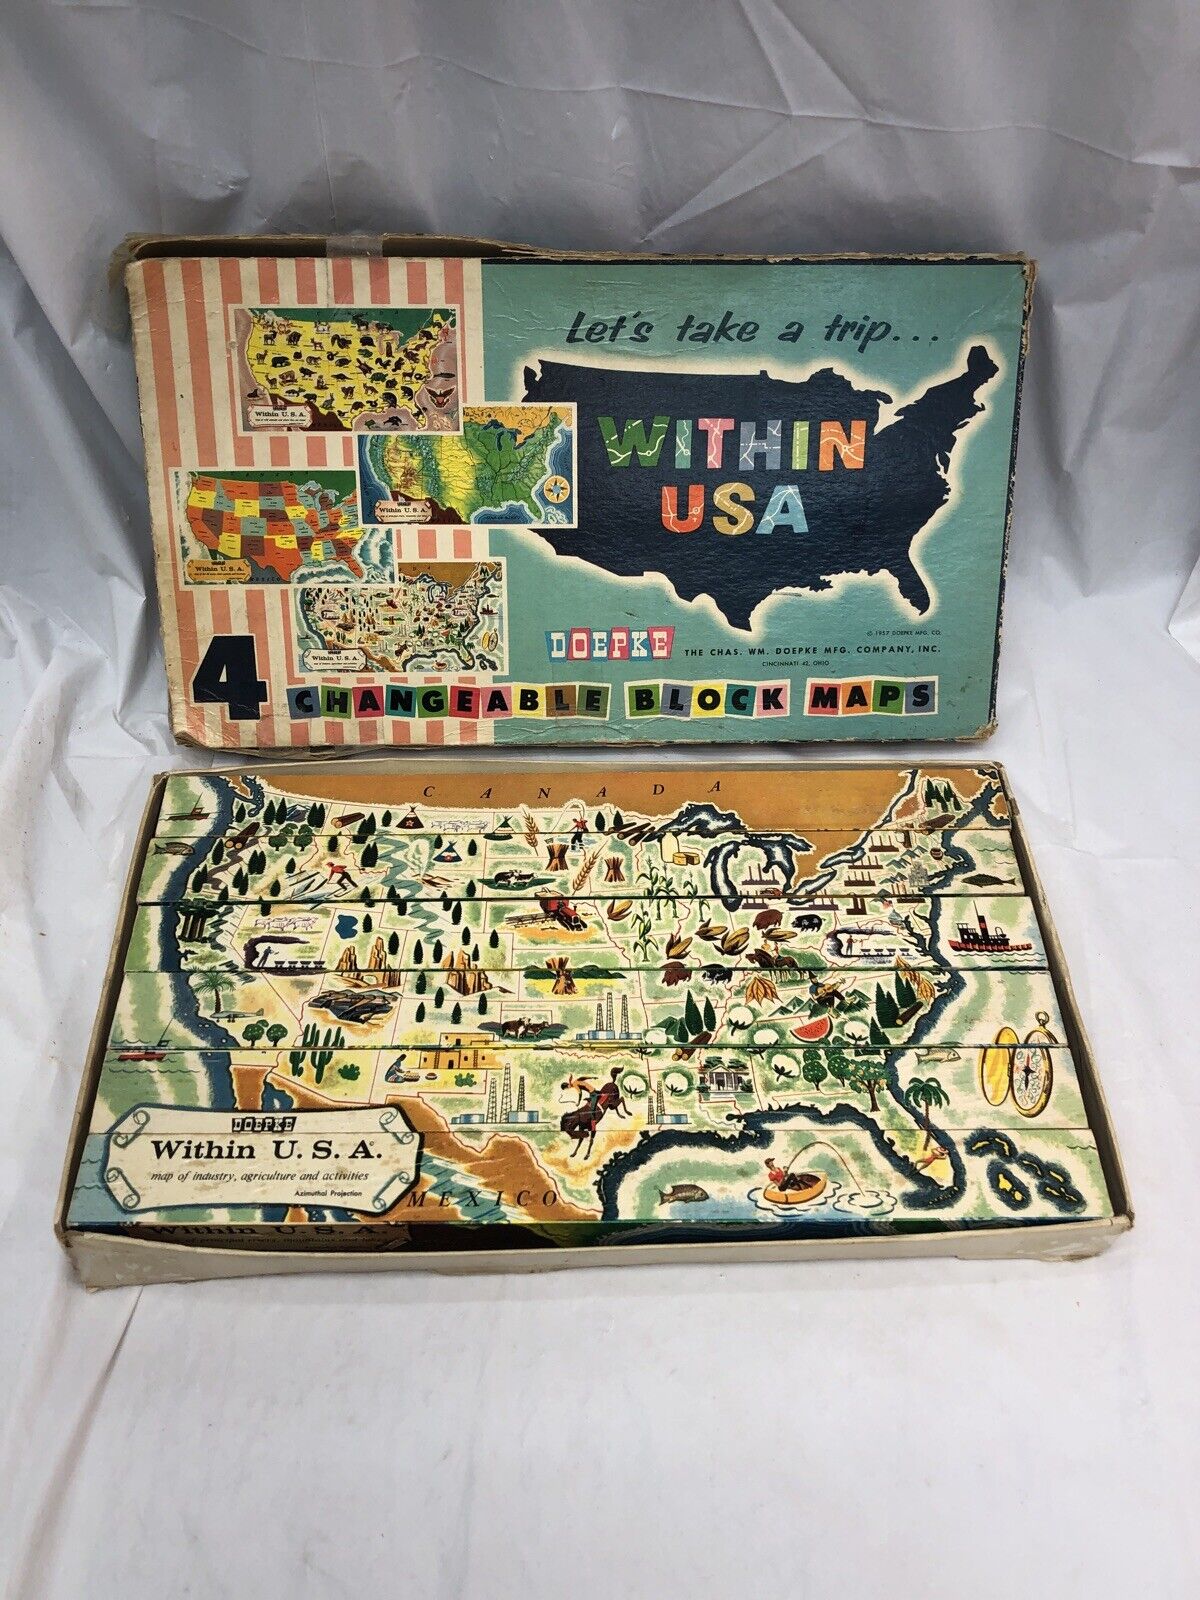 Chas Wm Doepke VTG 1950s Wooden Block Maps Toy Let's Take A Trip Within USA 1957